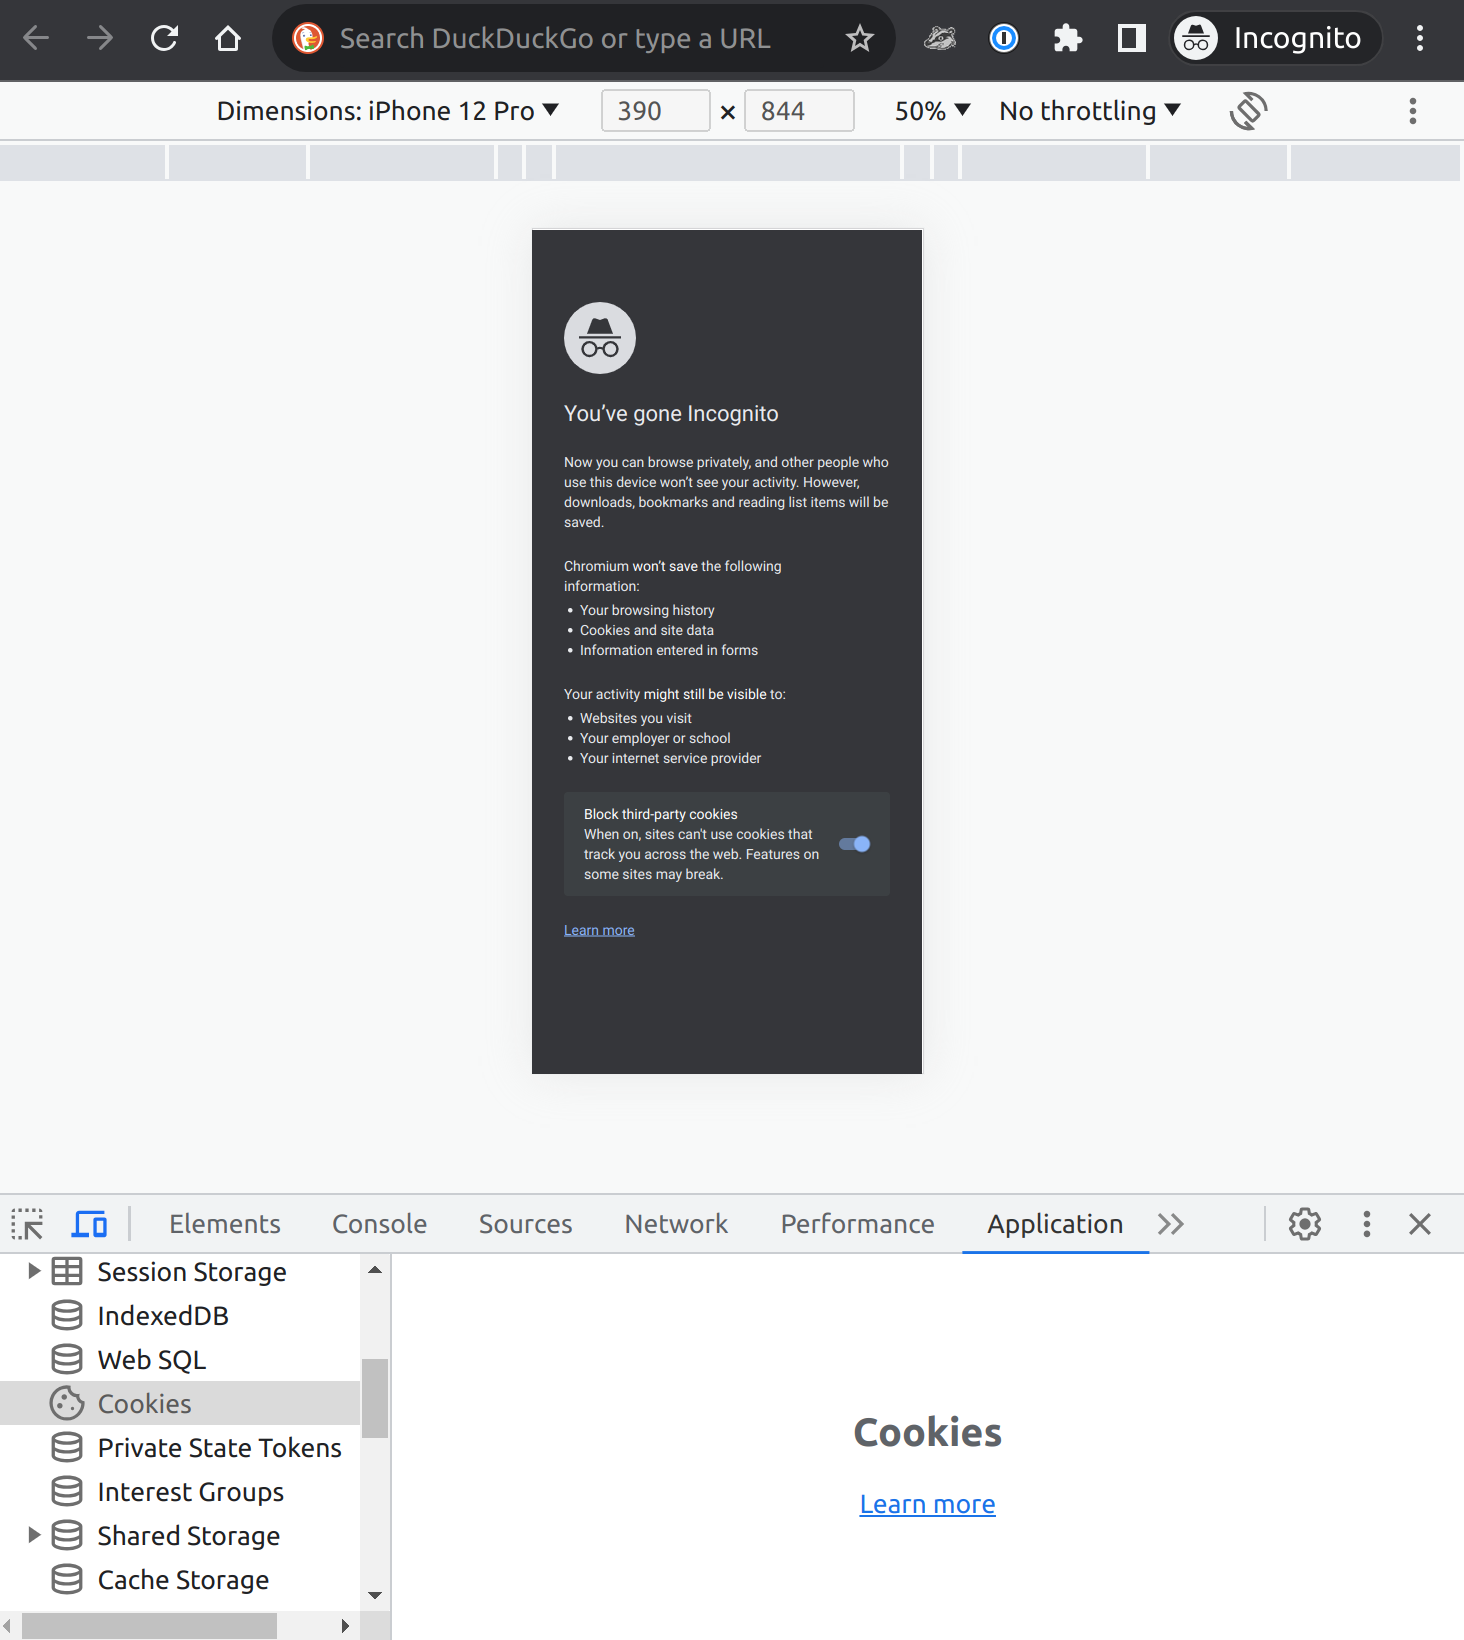 Chrome incognito window with developer tools for simulating mobile devices and controlling cookies